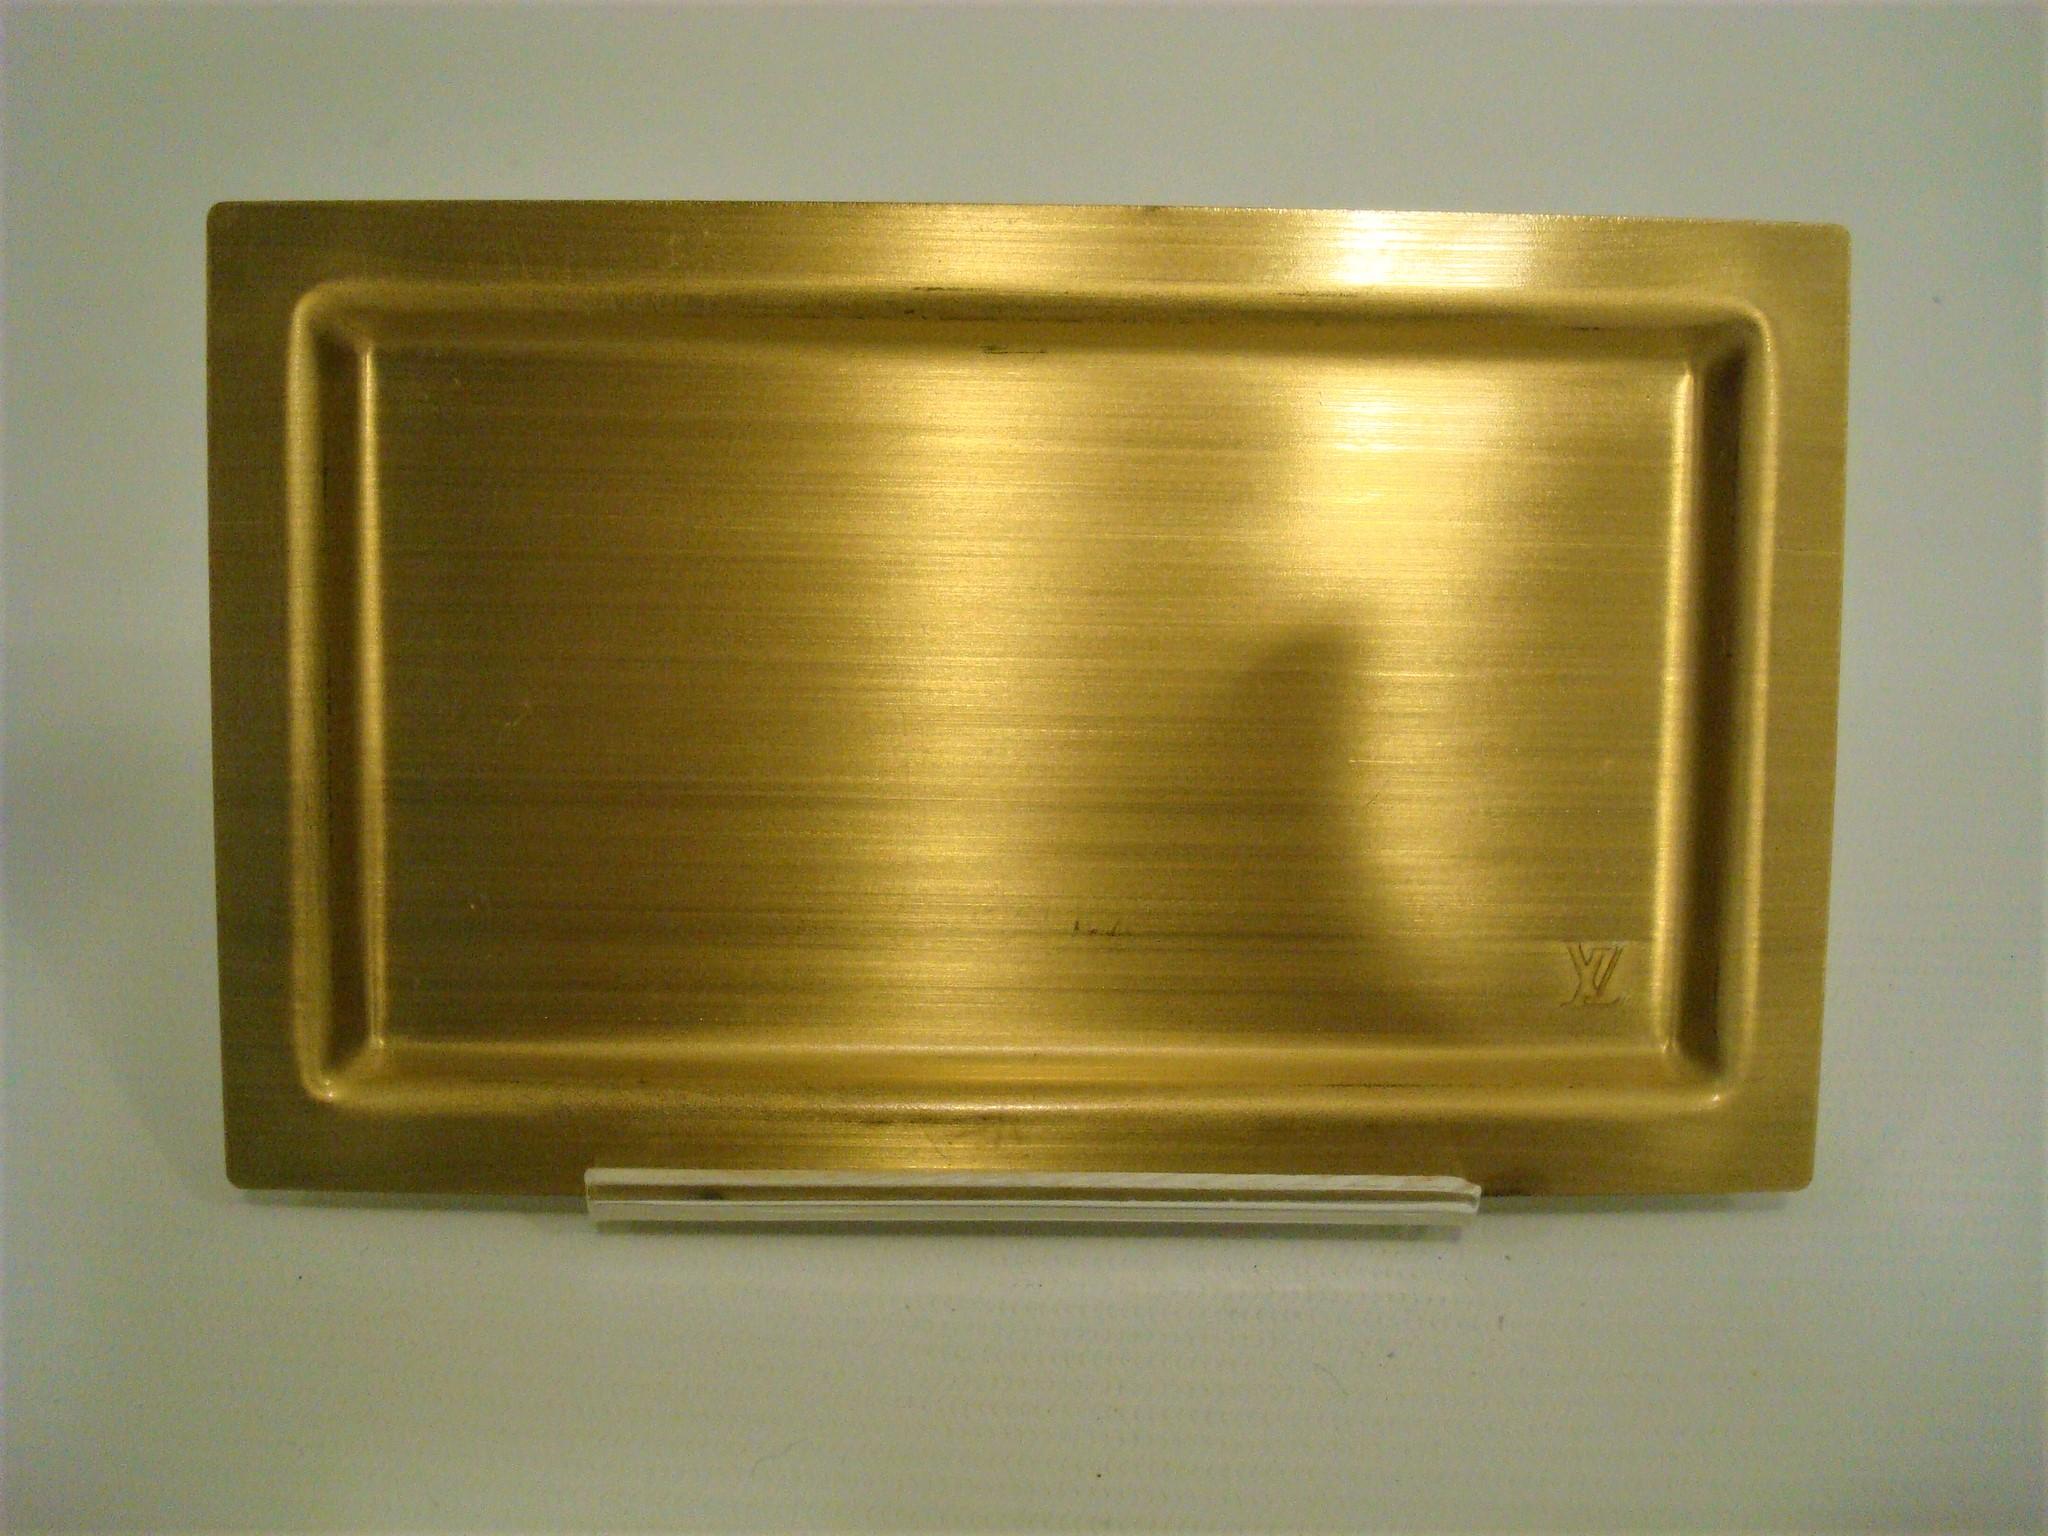 Rare to see Louis Vuitton Small Tray. Very chic
Louis Vuitton Jewelry Dish or a Personal Cards / Keys / Phone / Coins Plate
This piece is a handsome Tray. Can be use as a jewelry dish or a personal desk cards plate. Perfect size. Trinket Tray / Vide